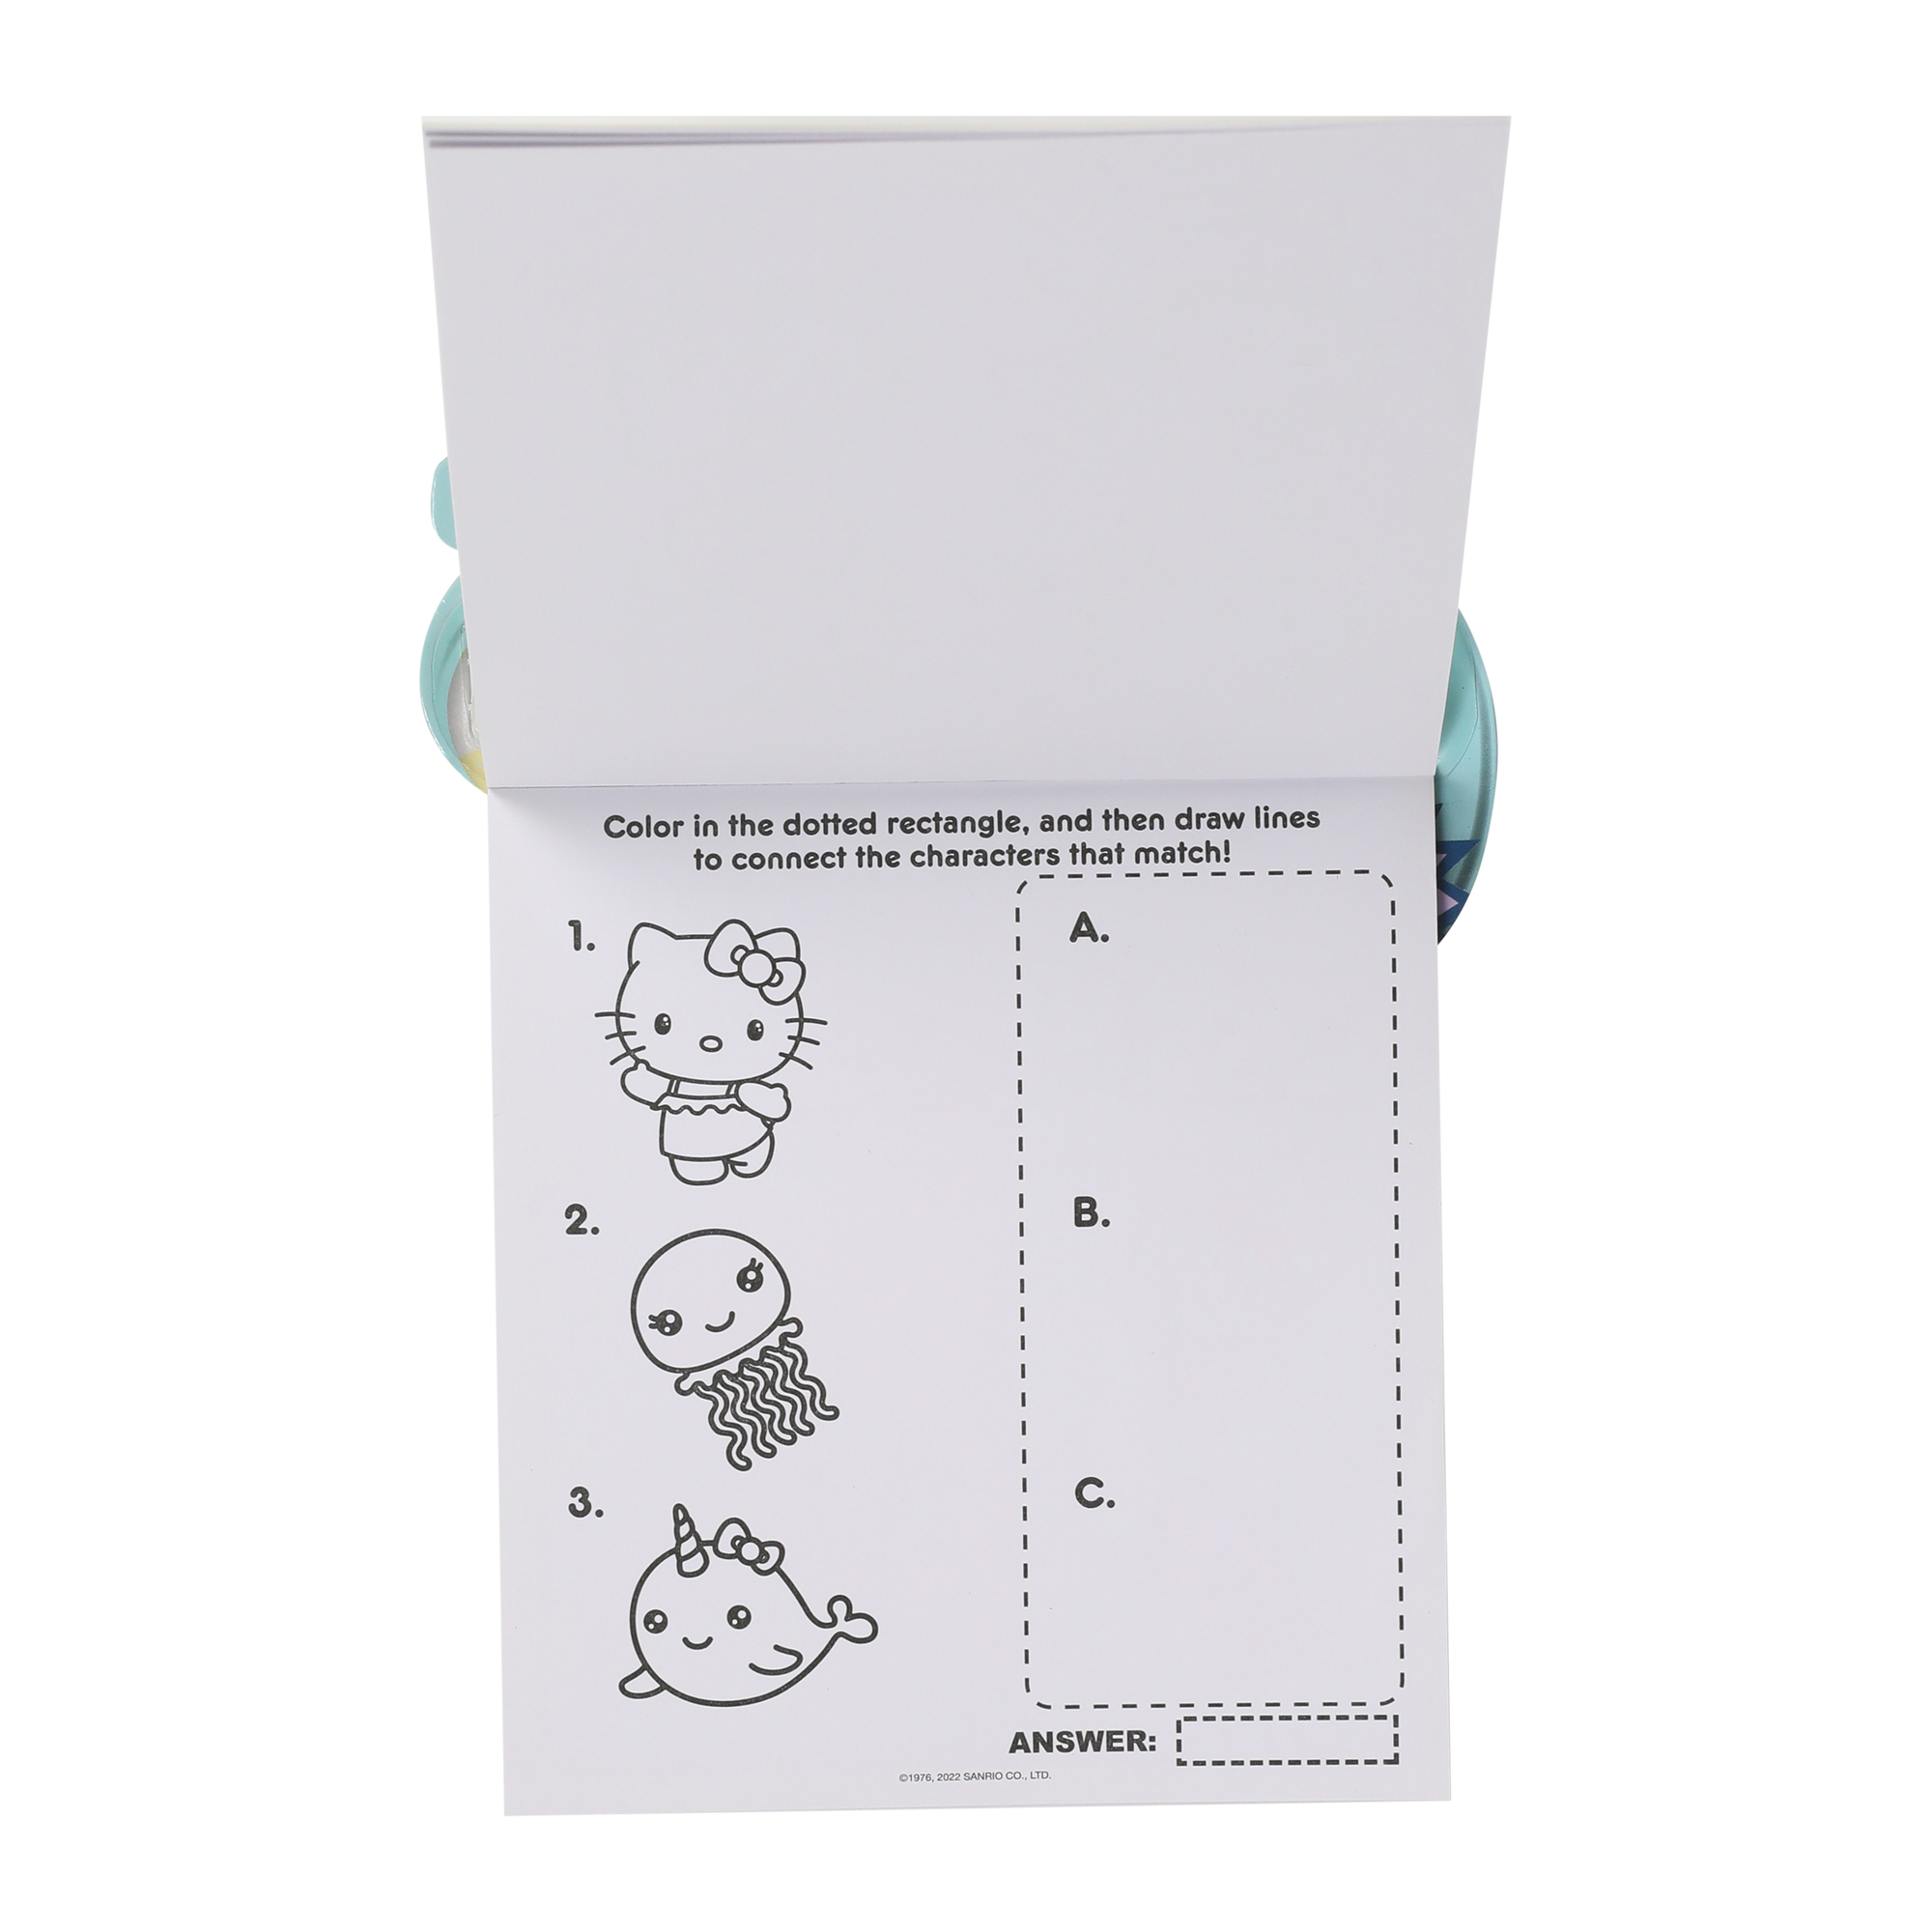 hello kitty® imagine ink® magic pictures mess-free coloring book